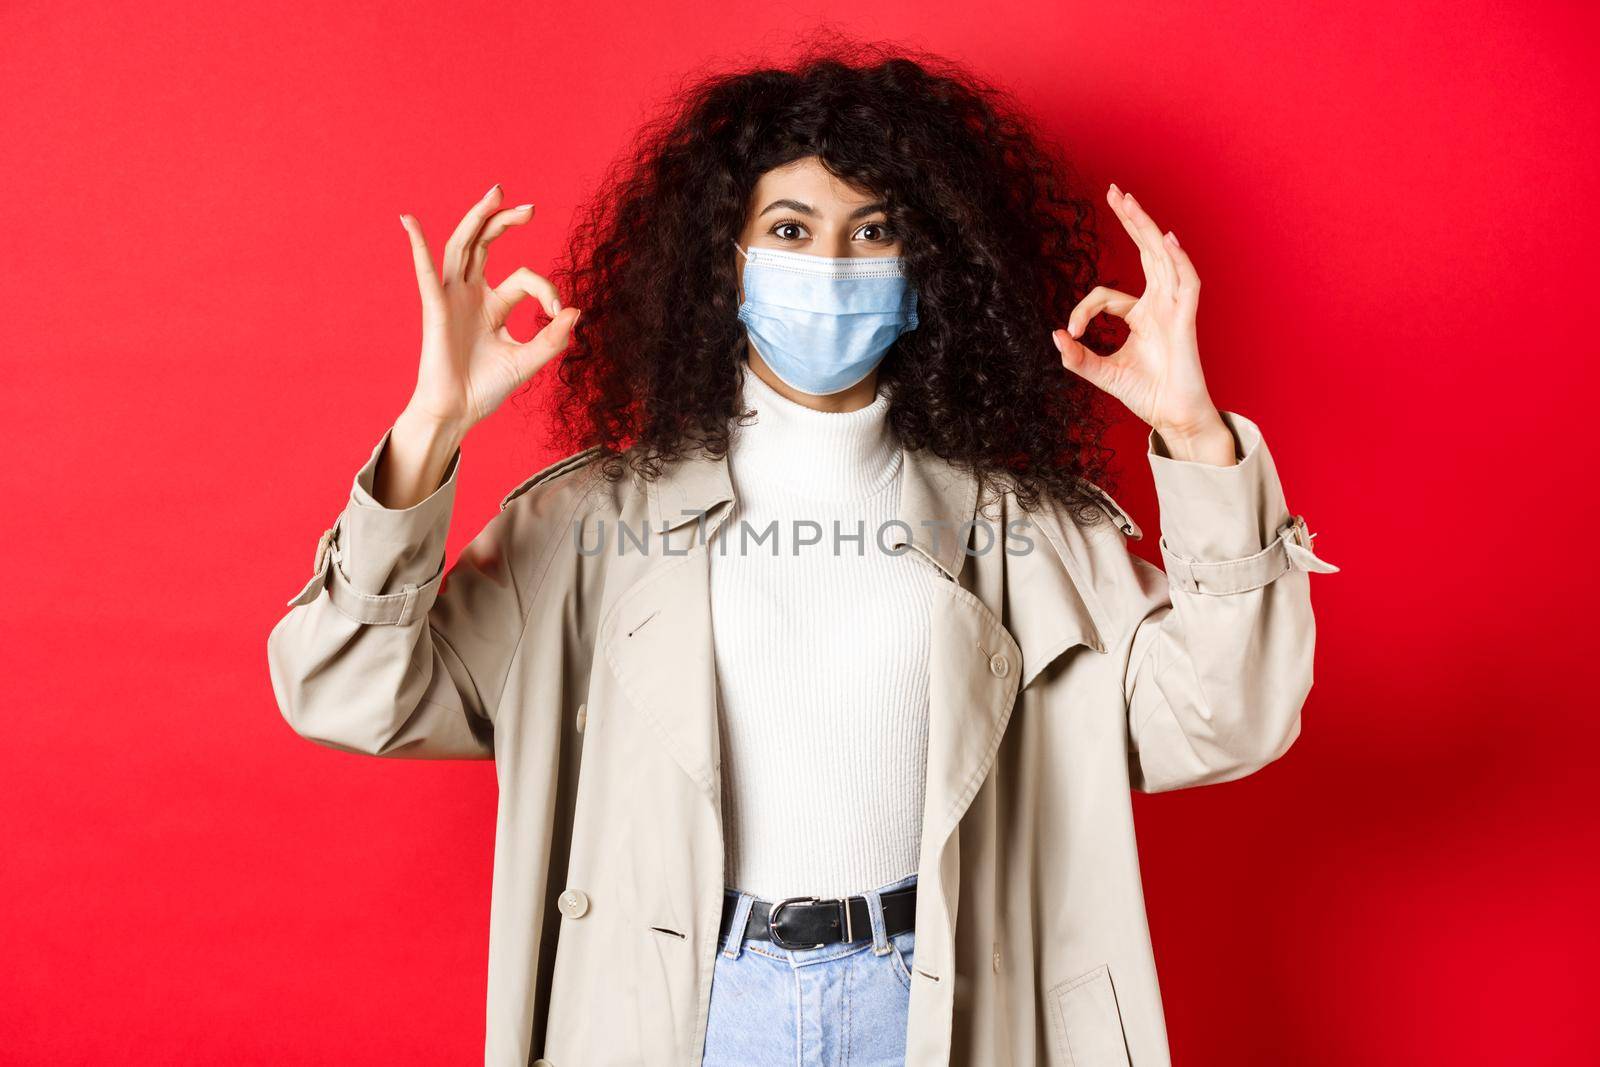 Covid-19, social distancing and quarantine concept. Fashionable woman with curly hair, wearing medical mask and trench coat, showing okay gestures, red background.